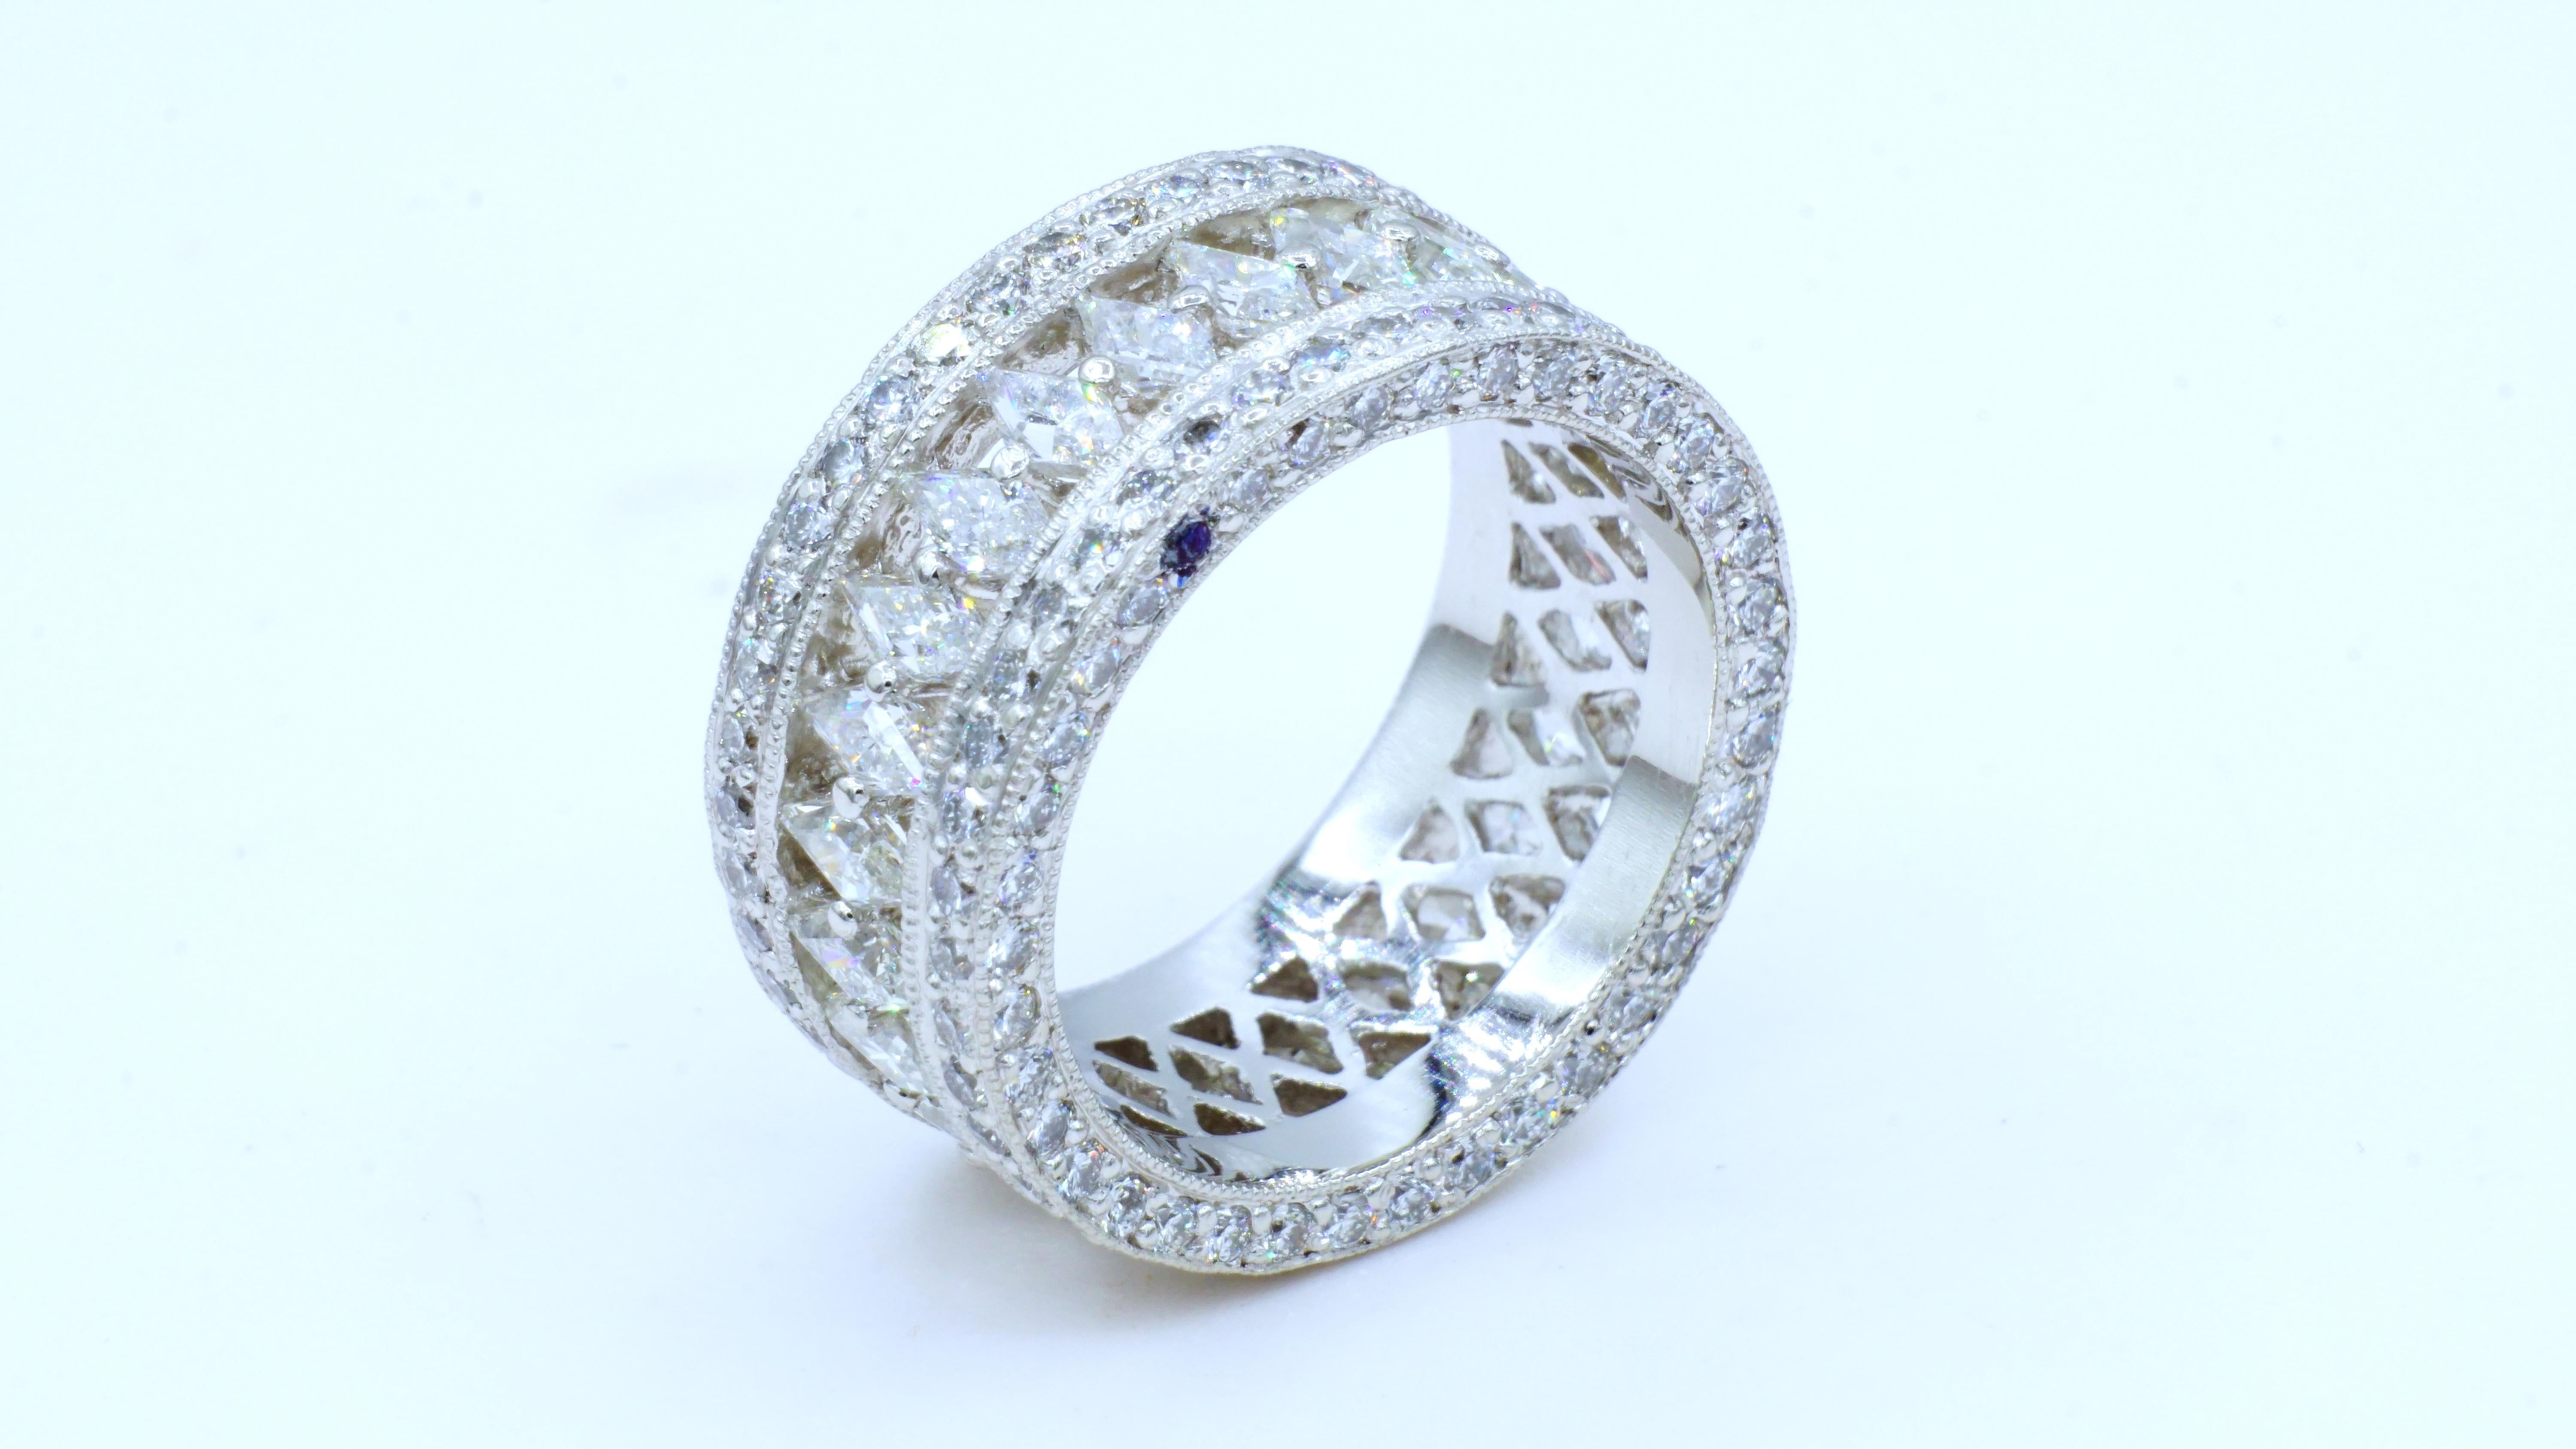 True one-of-a-kind custom platinum eternity ring showcasing a center row of  25 channel/prong set custom-cut diamonds of 3.00cttw. Accenting the center row of diamonds are two rows of 162 round brilliant diamonds that are 1.80cttw.  On the side,